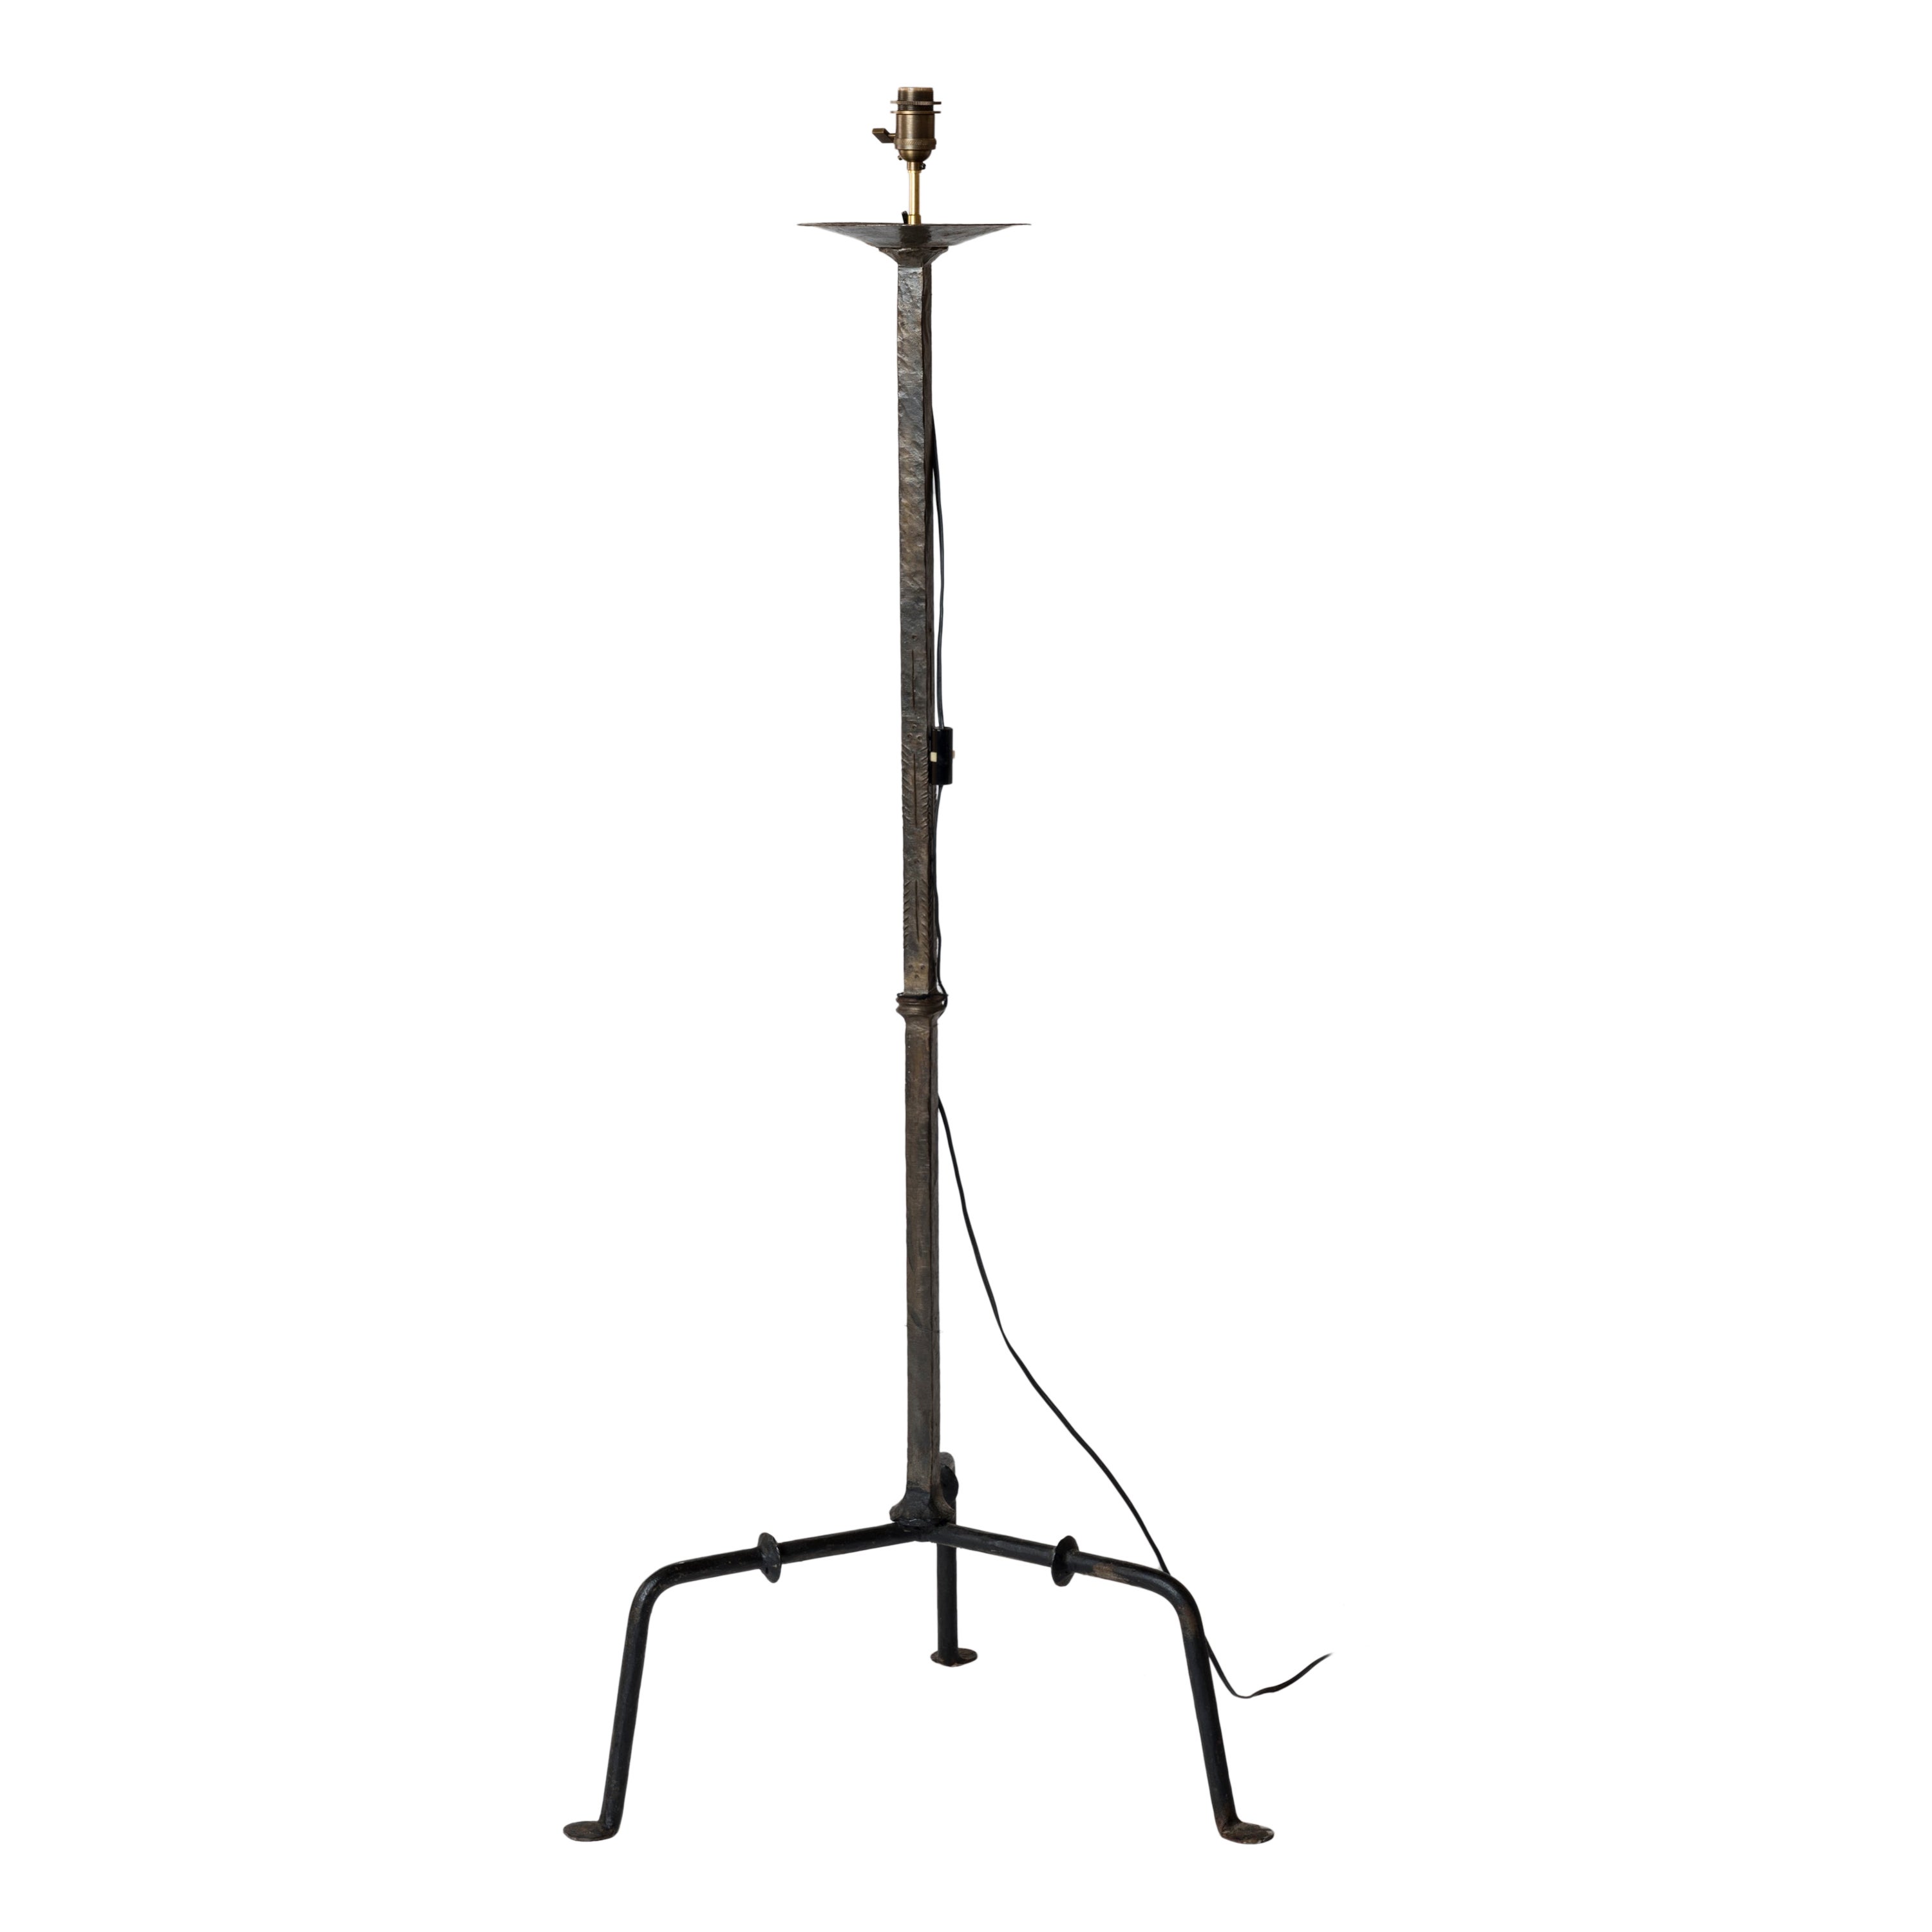 Brutalist Etched Wrought Iron "Ferronerie" Tripod Floor Lamp, France, 1960s For Sale